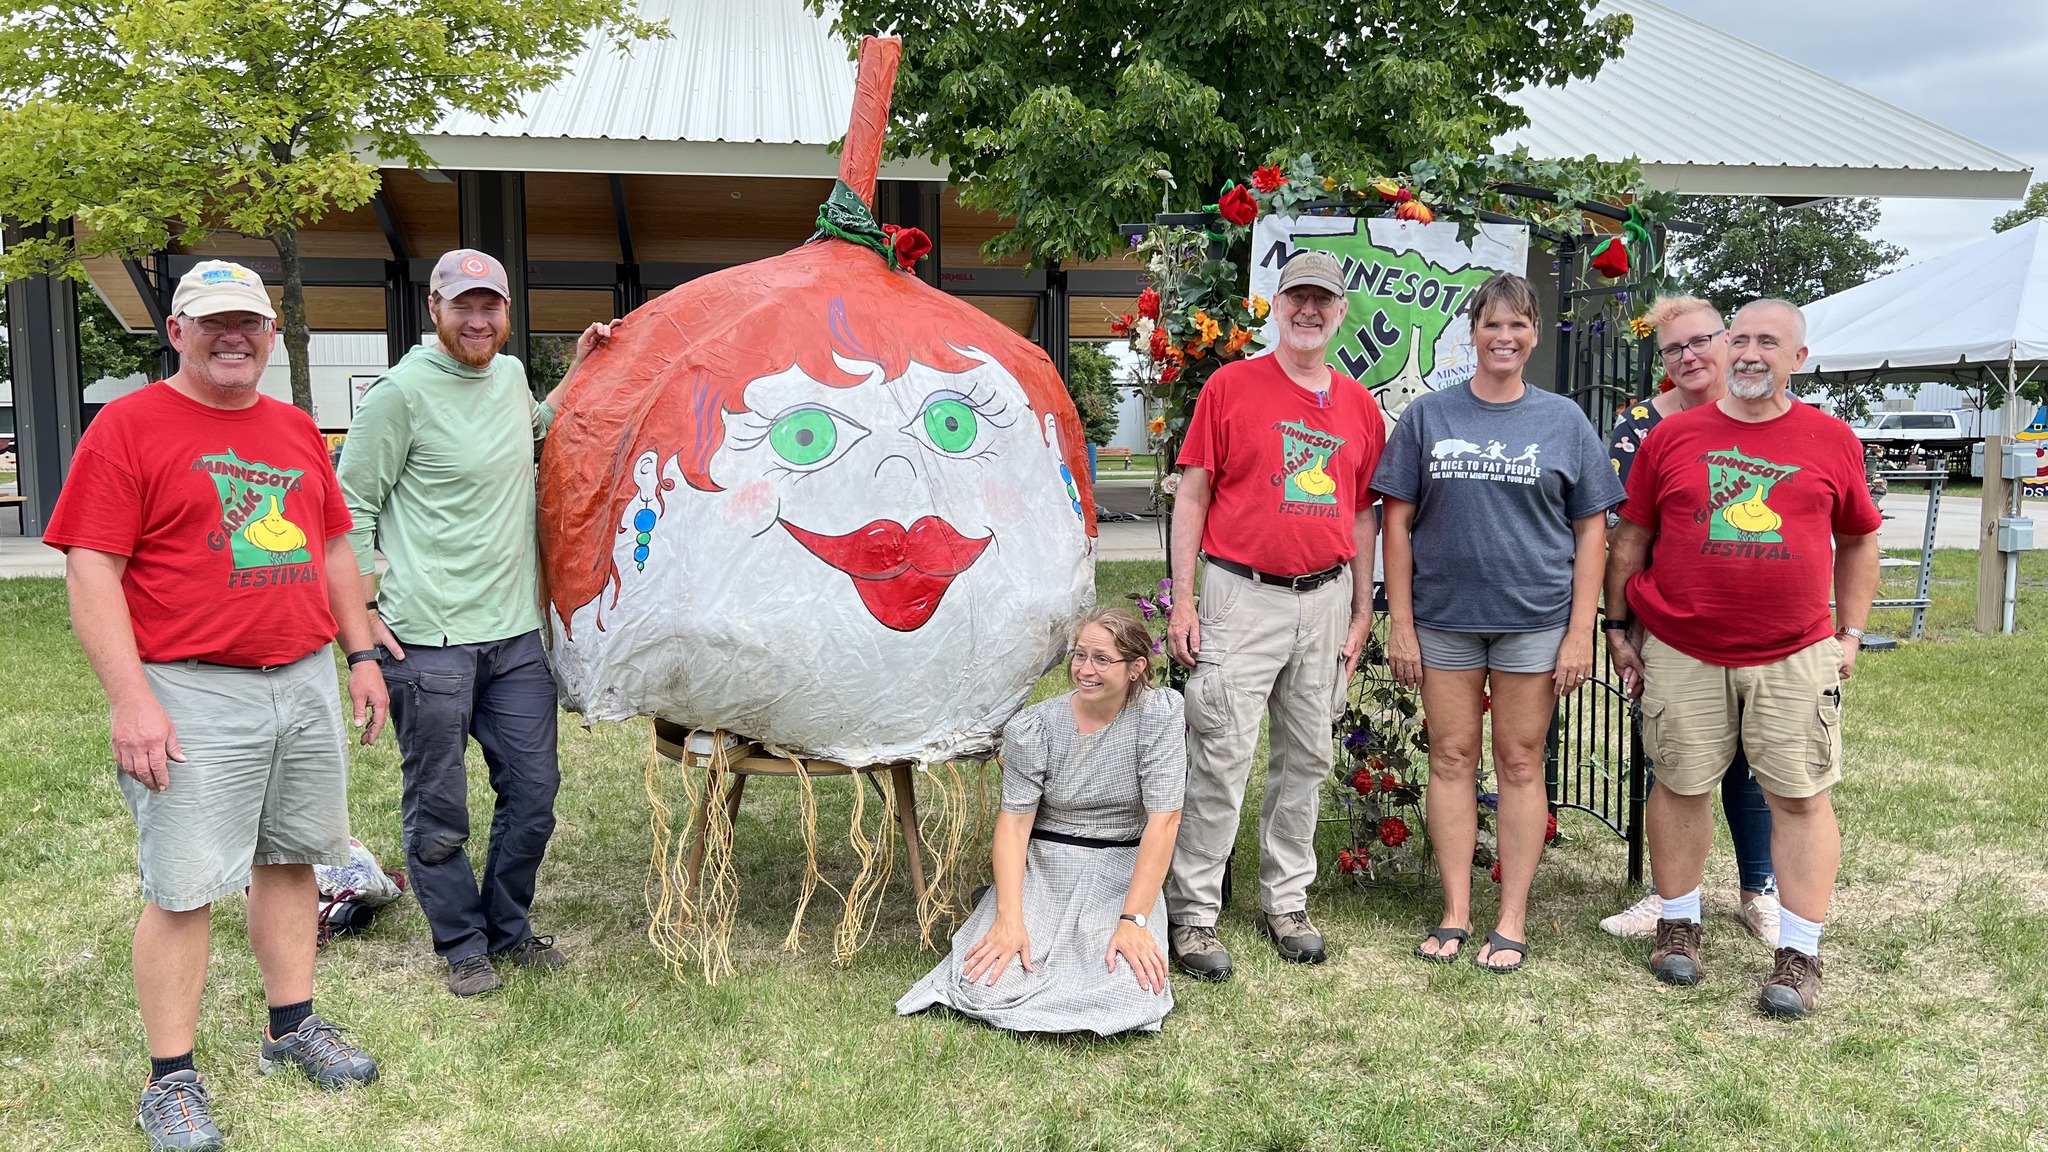 People lined up with giant paper mache garlic bulb art at Minnesota Garlic Festival.